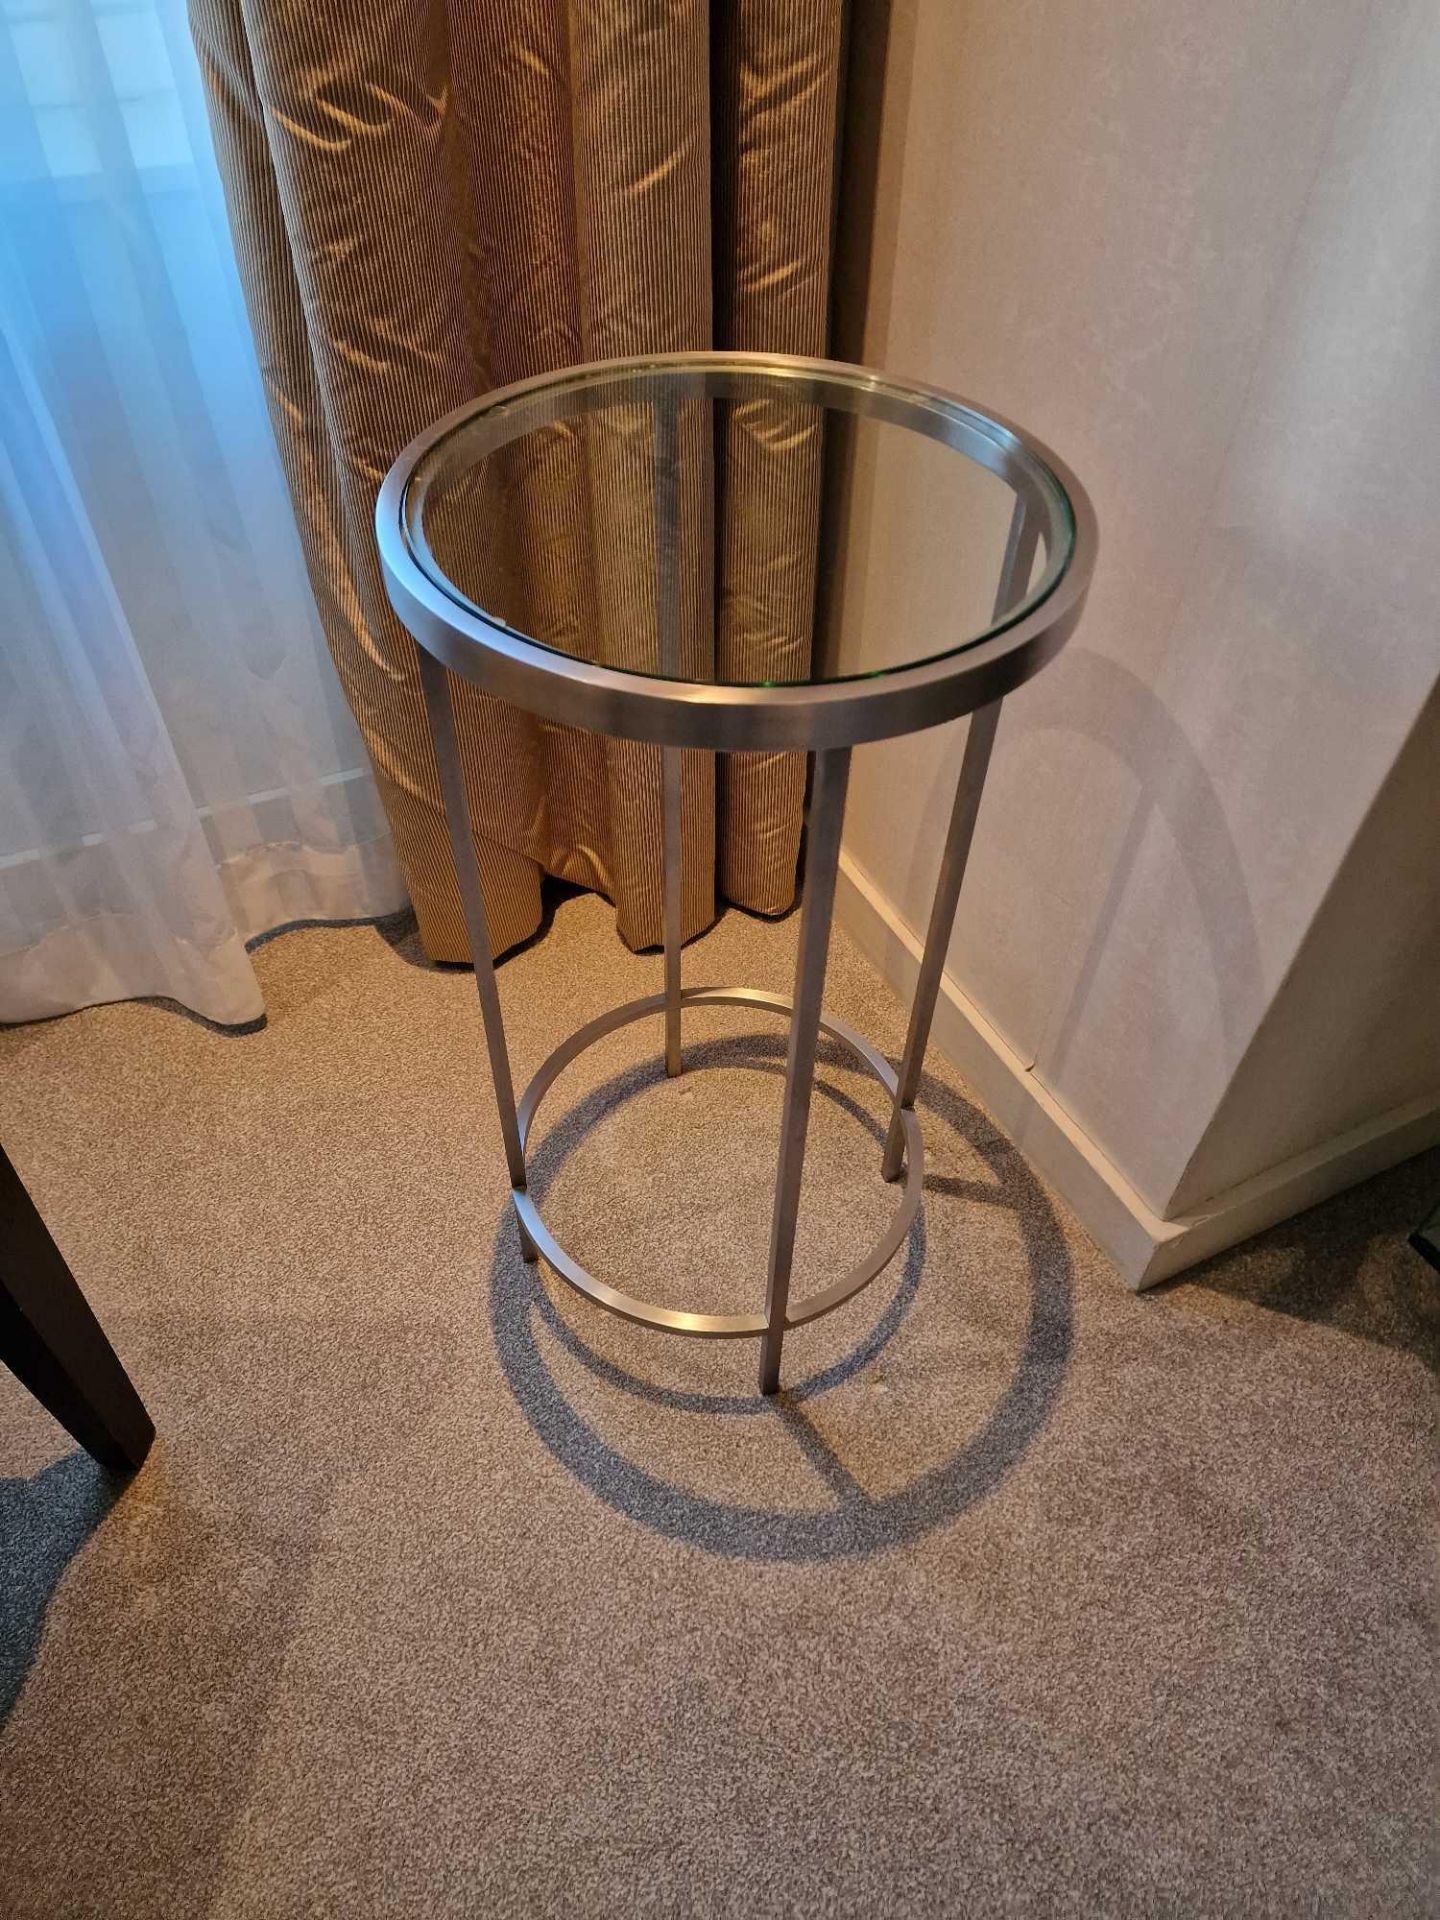 A stainless steel and tempered glass side table 35cm diameter x 64cm tall (Room 2A)